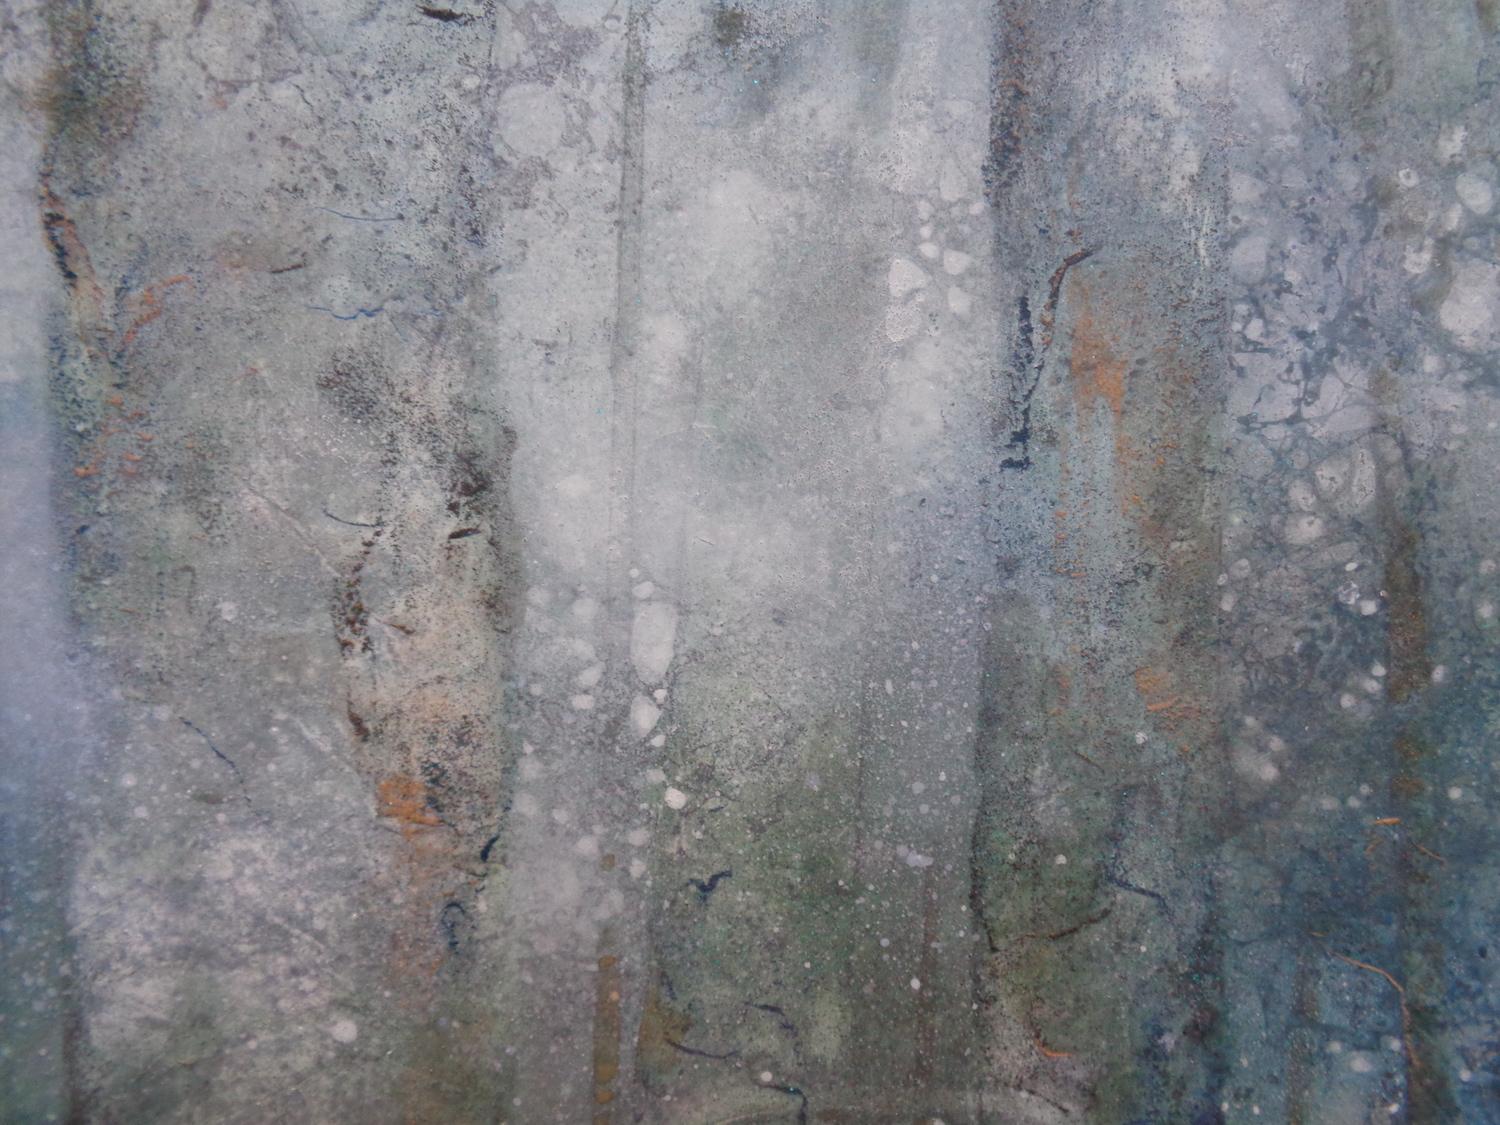 Plenitude II by CHEN Yiching - Nihonga landscape painting, forest For Sale 1